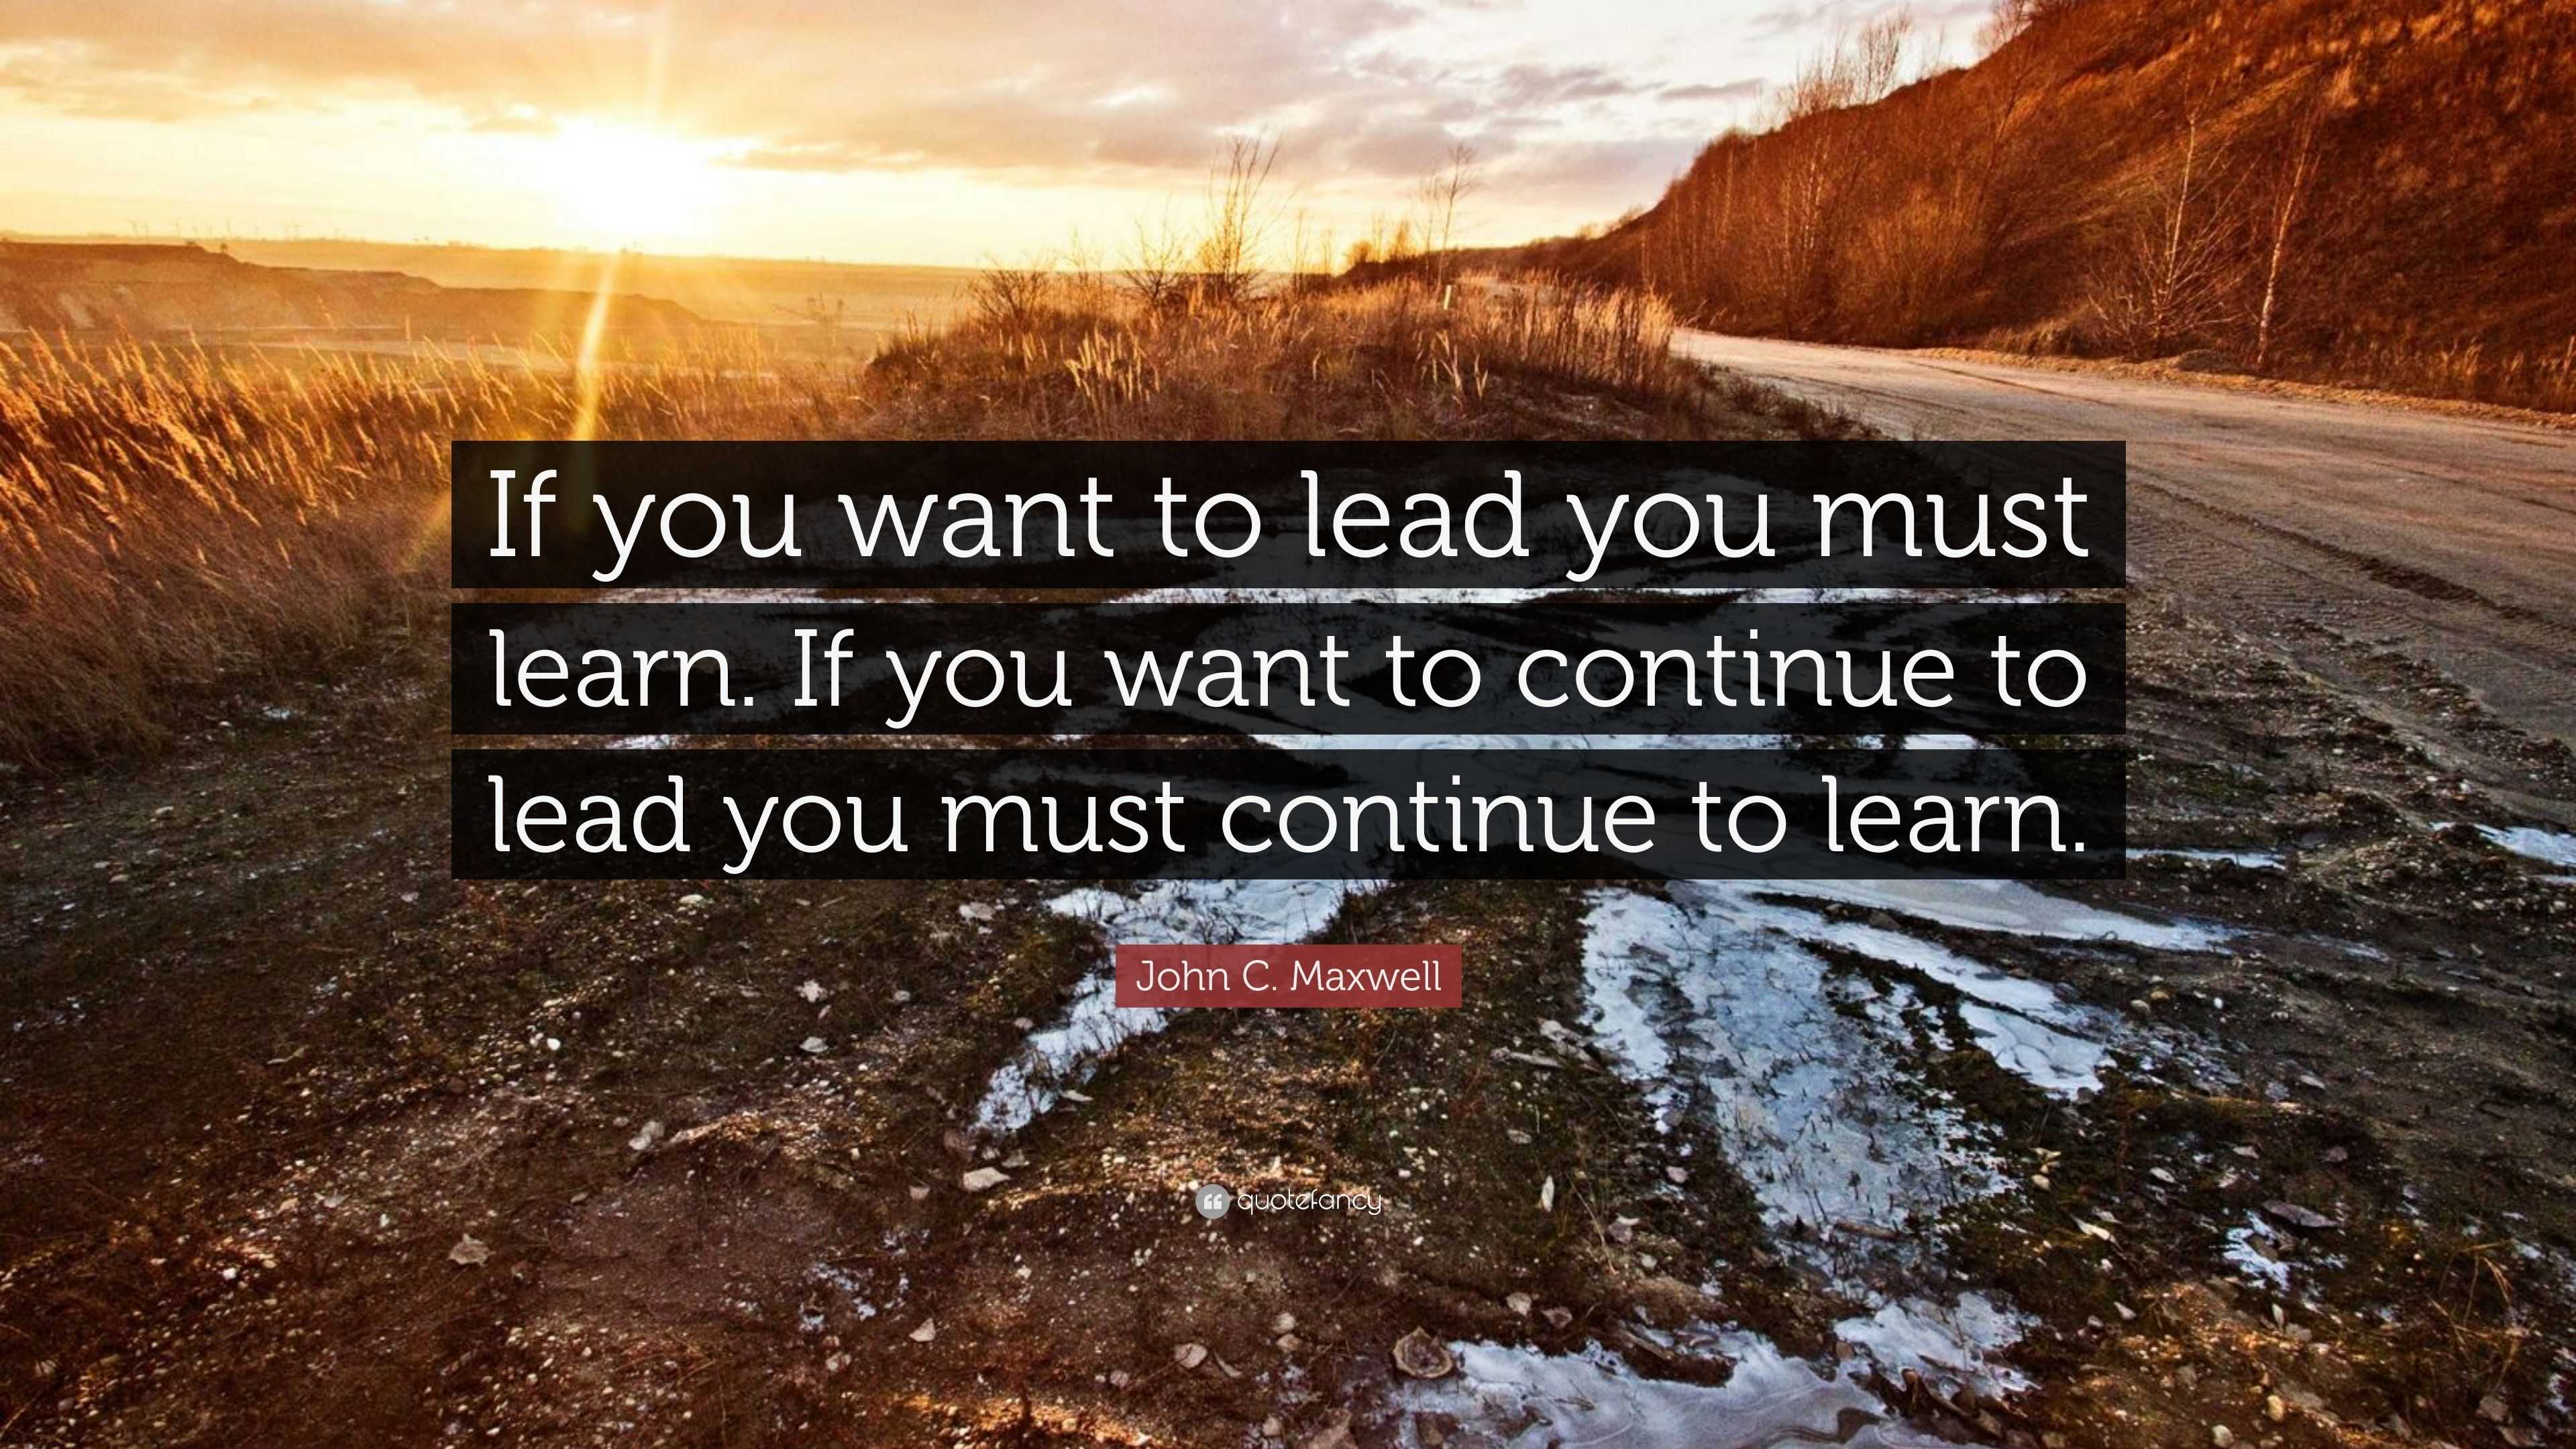 John C. Maxwell Quote “If you want to lead you must learn. If you want